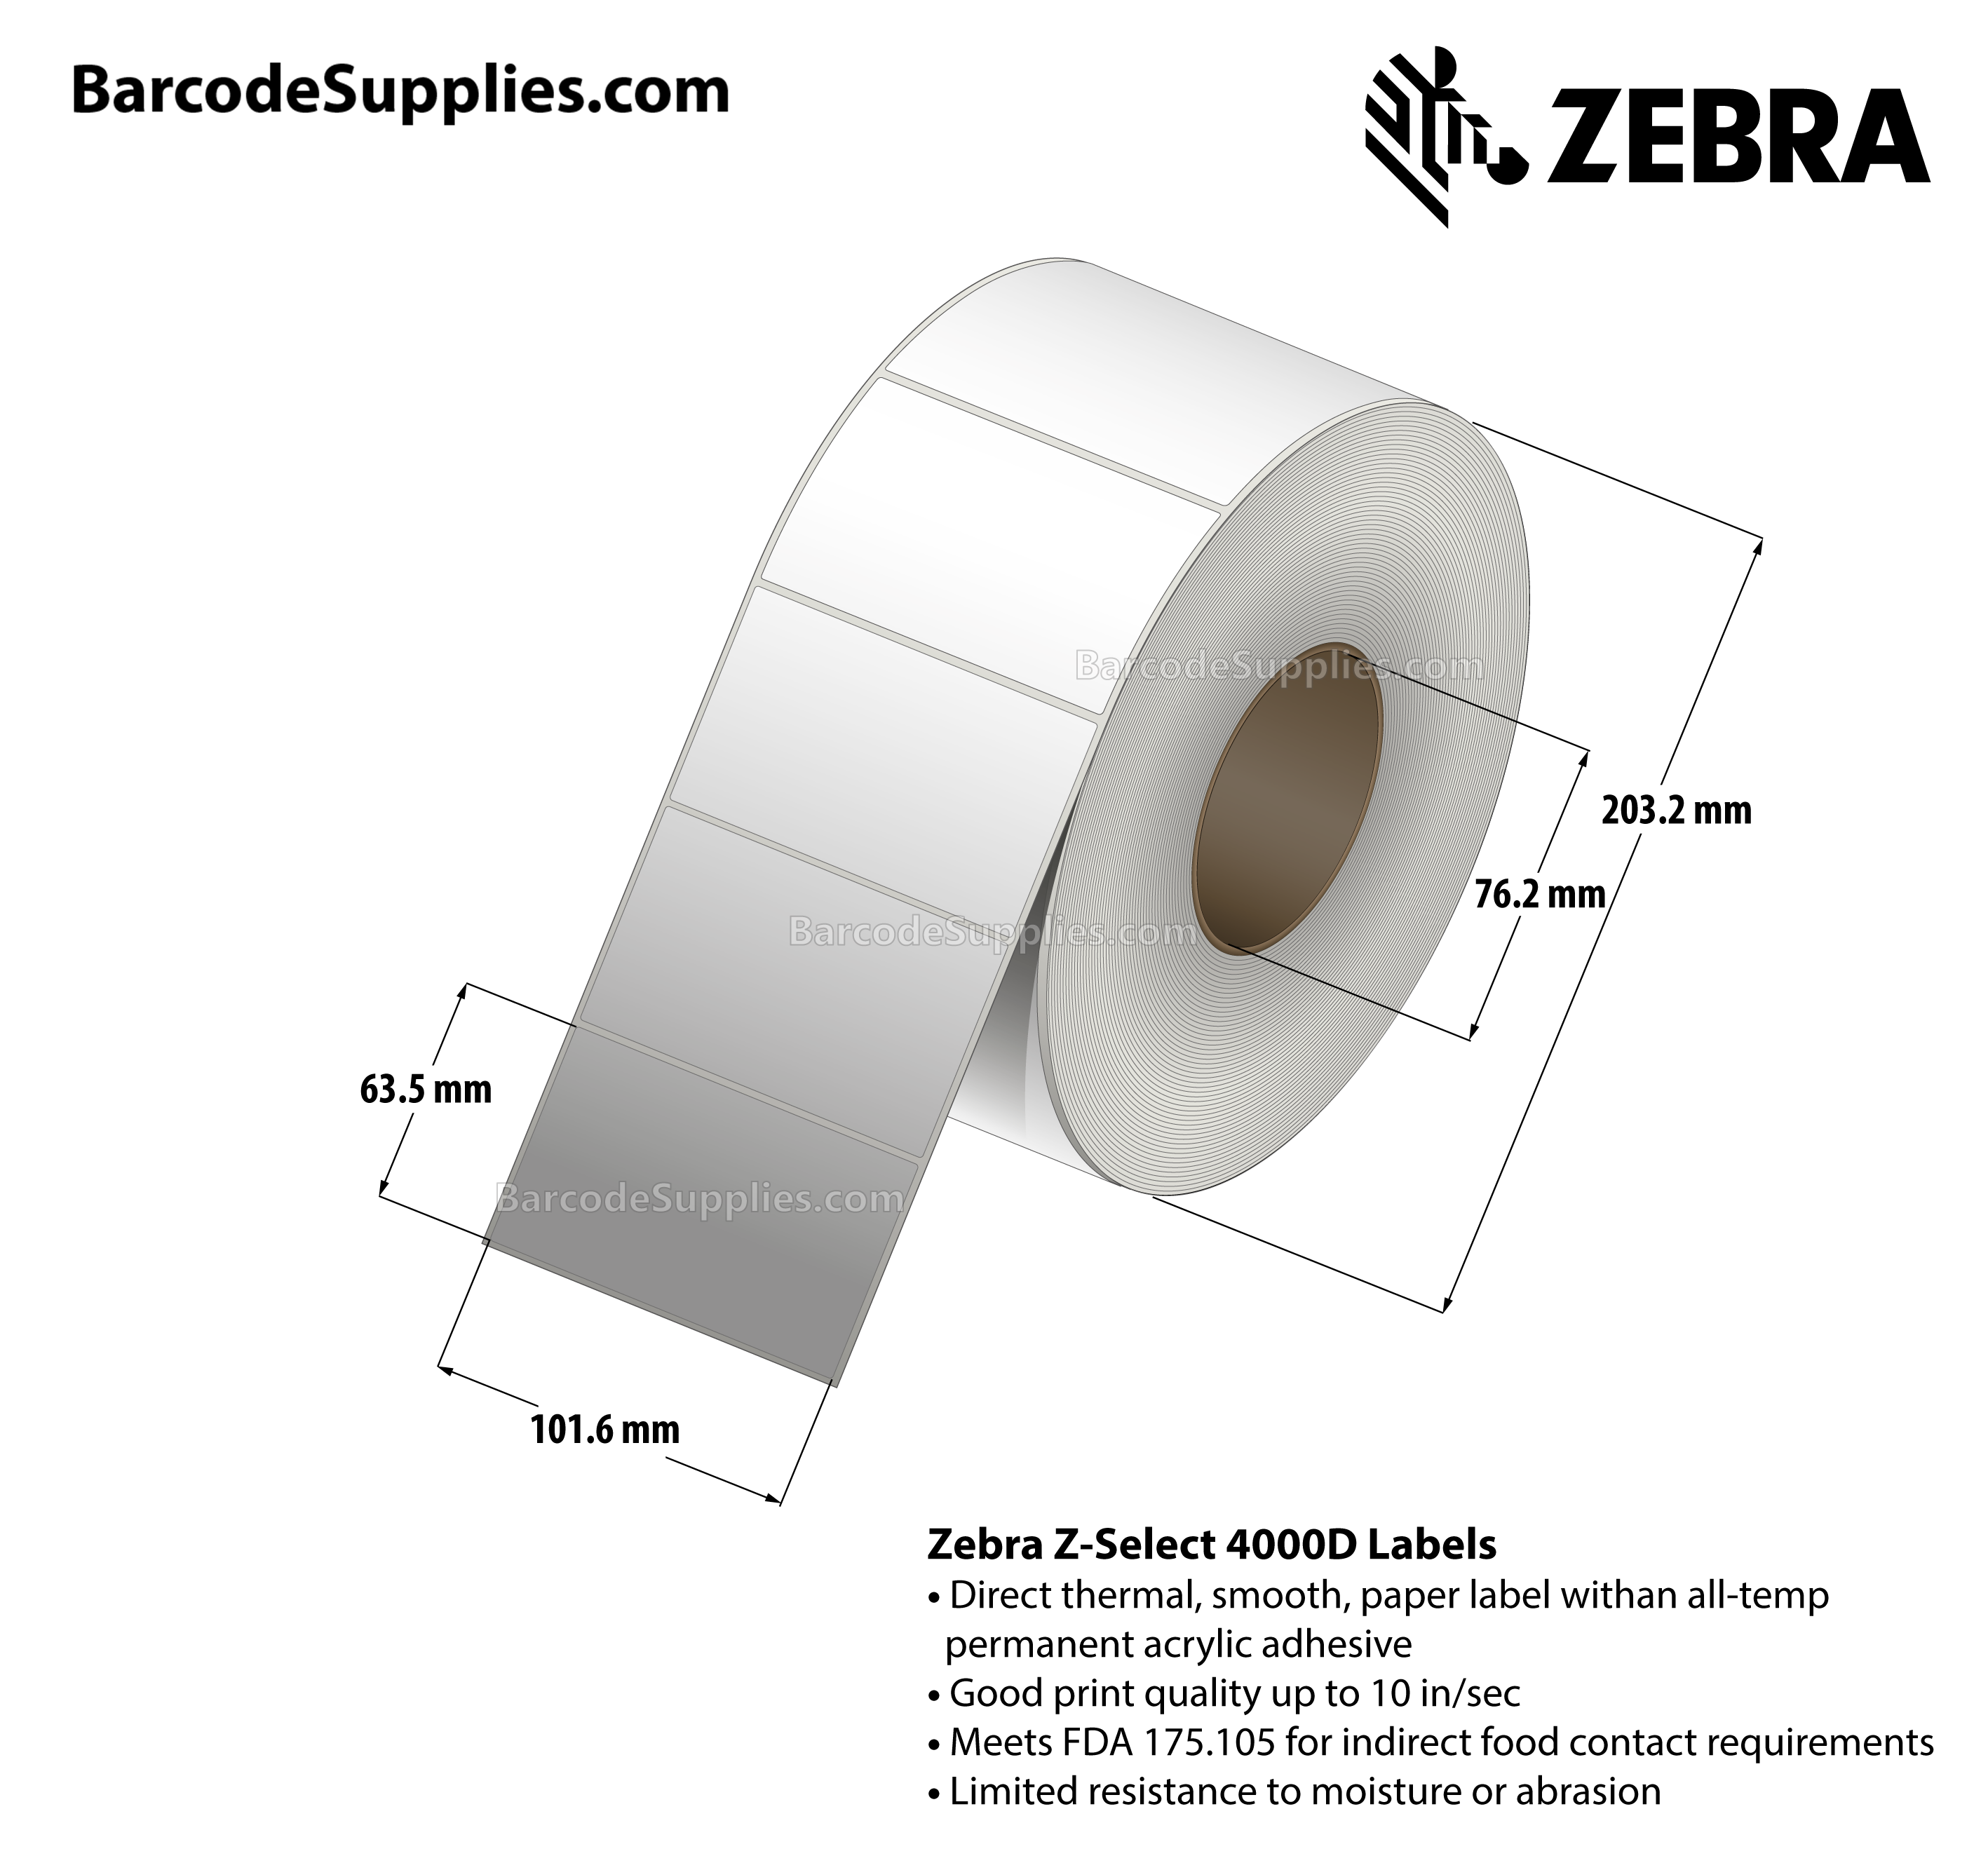 4 x 2.5 Direct Thermal White Z-Select 4000D Labels With All-Temp Adhesive - Not Perforated - 2220 Labels Per Roll - Carton Of 4 Rolls - 8880 Labels Total - MPN: 72344